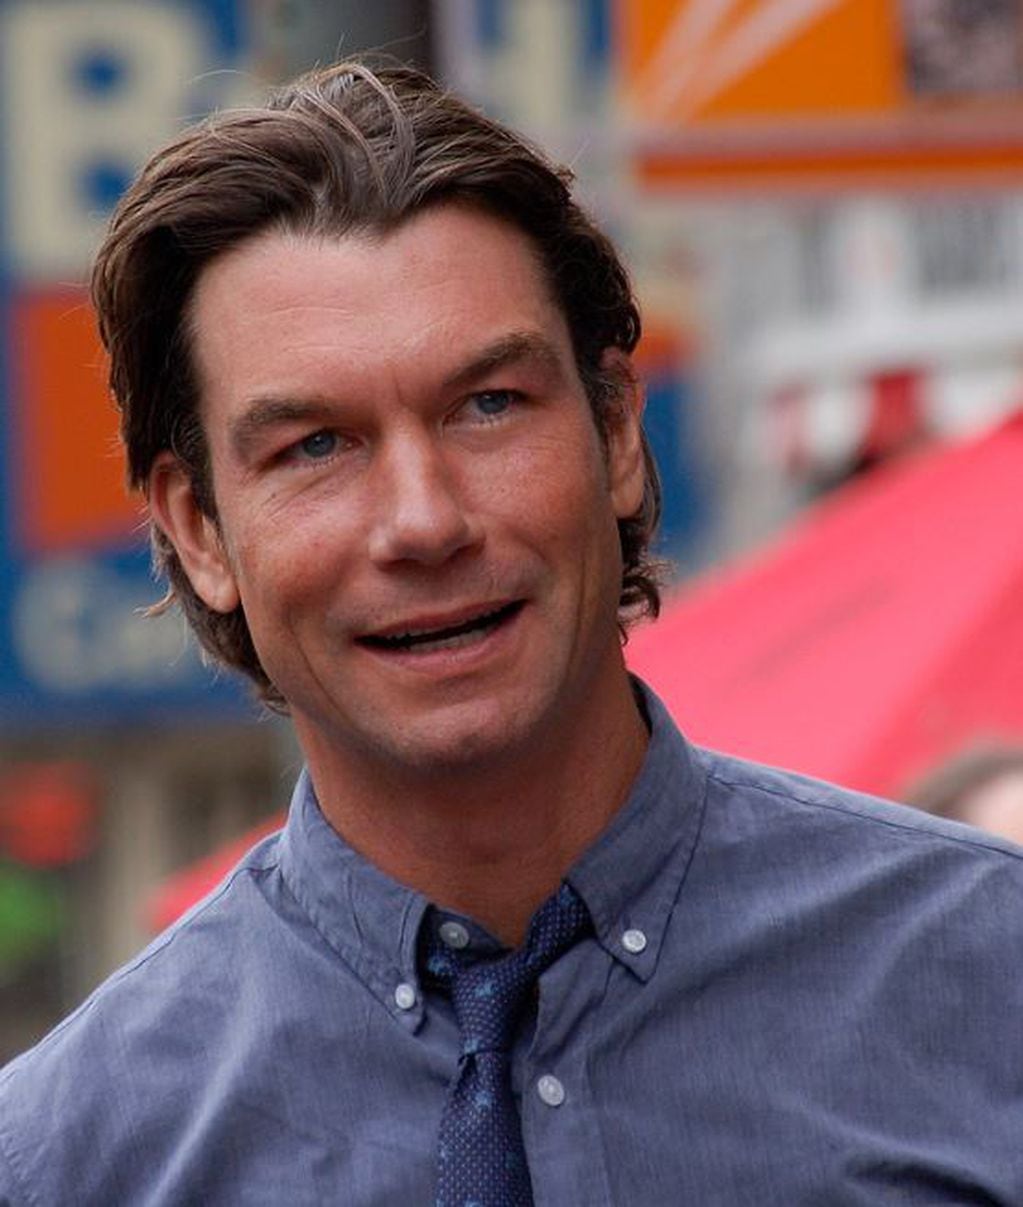 Jerry O’Connell a sus 49 años.